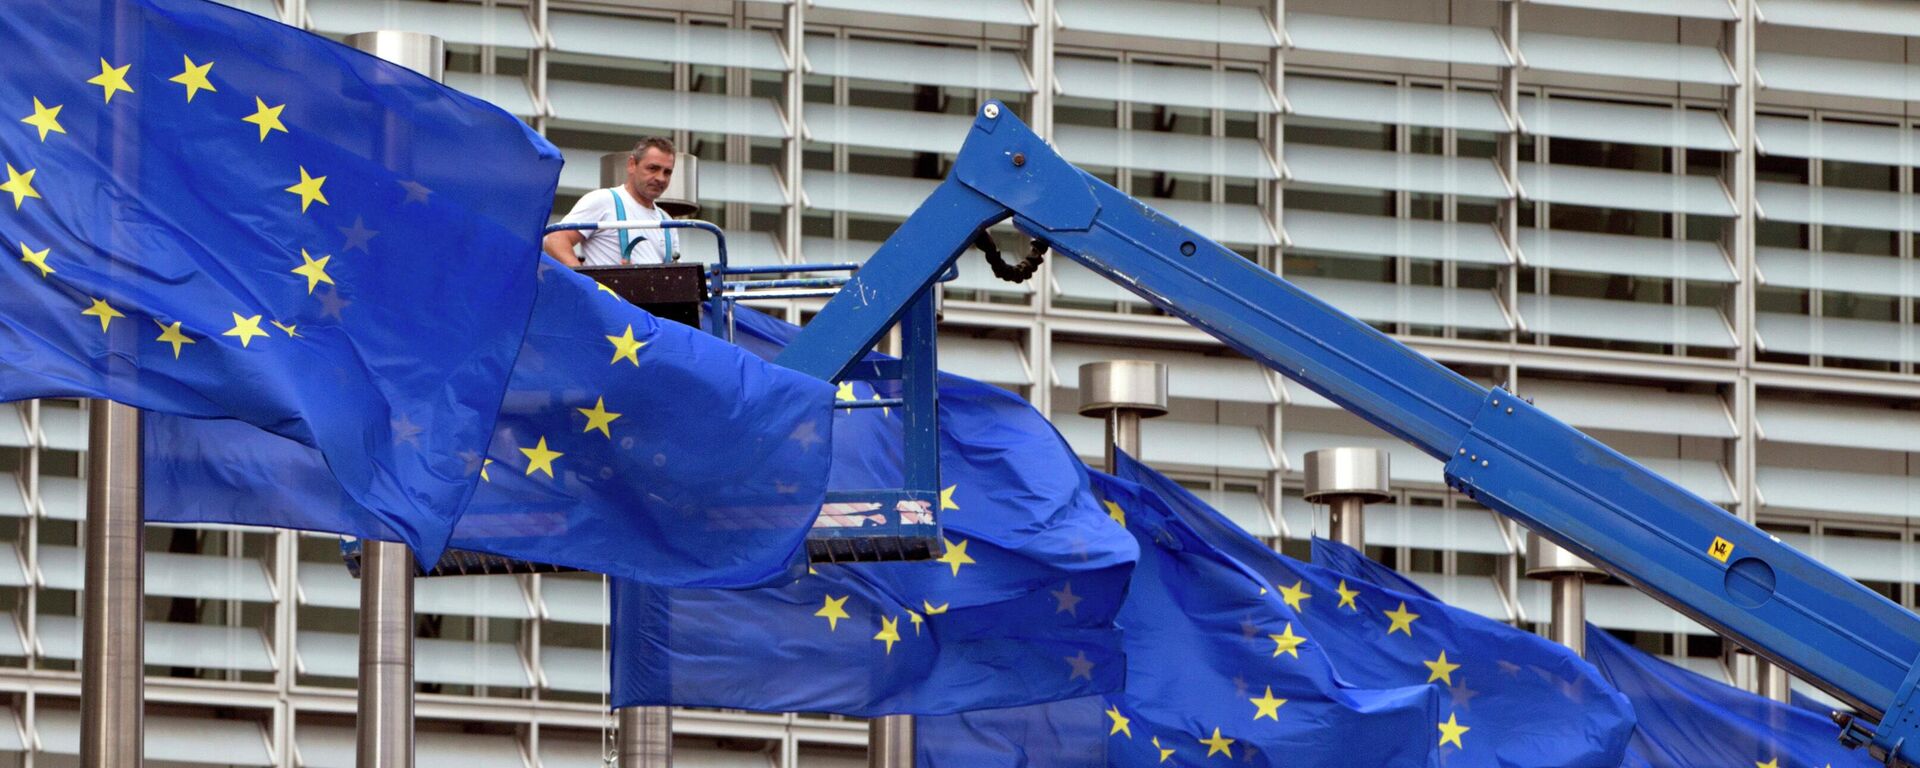 FILE- In this June 23, 2016 file photo, a worker on a lift adjusts the EU flags in front of EU headquarters in Brussels - Sputnik International, 1920, 13.02.2023